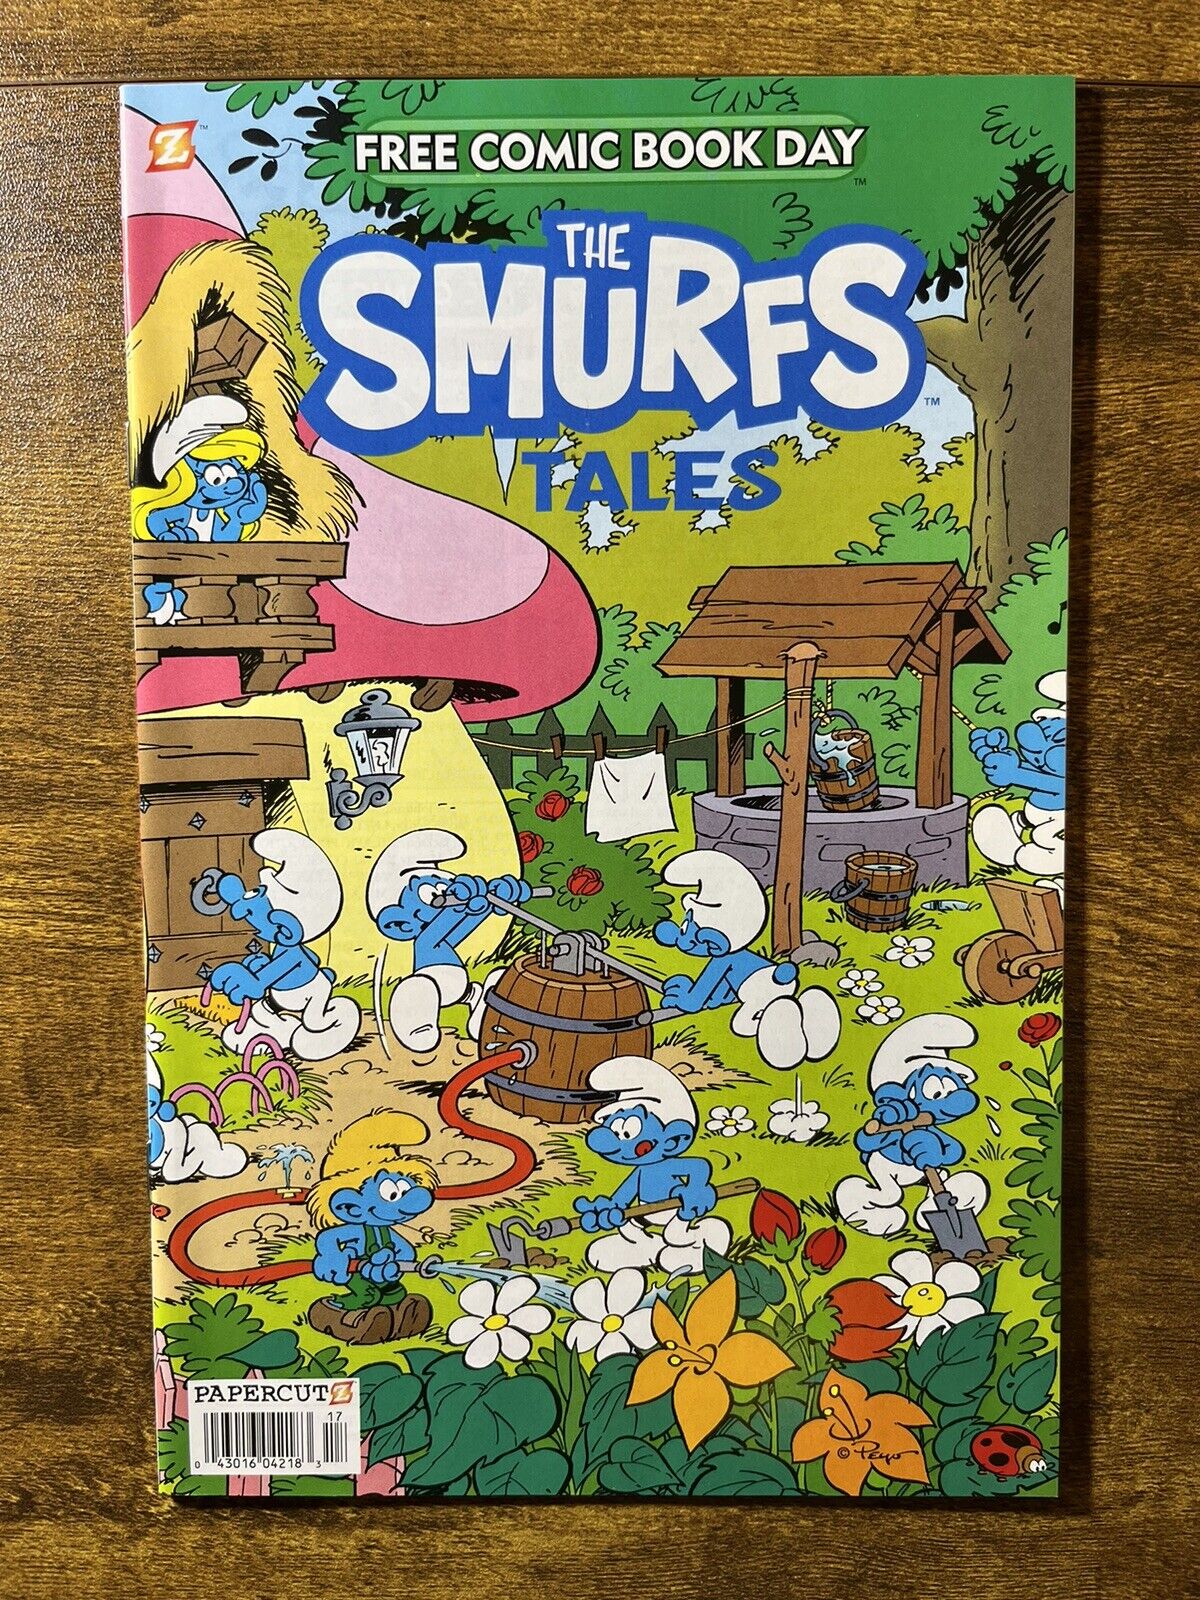 THE SMURFS TALES FCBD 2021 FREE COMIC BOOK DAY NO STAMPS NO STICKERS NM